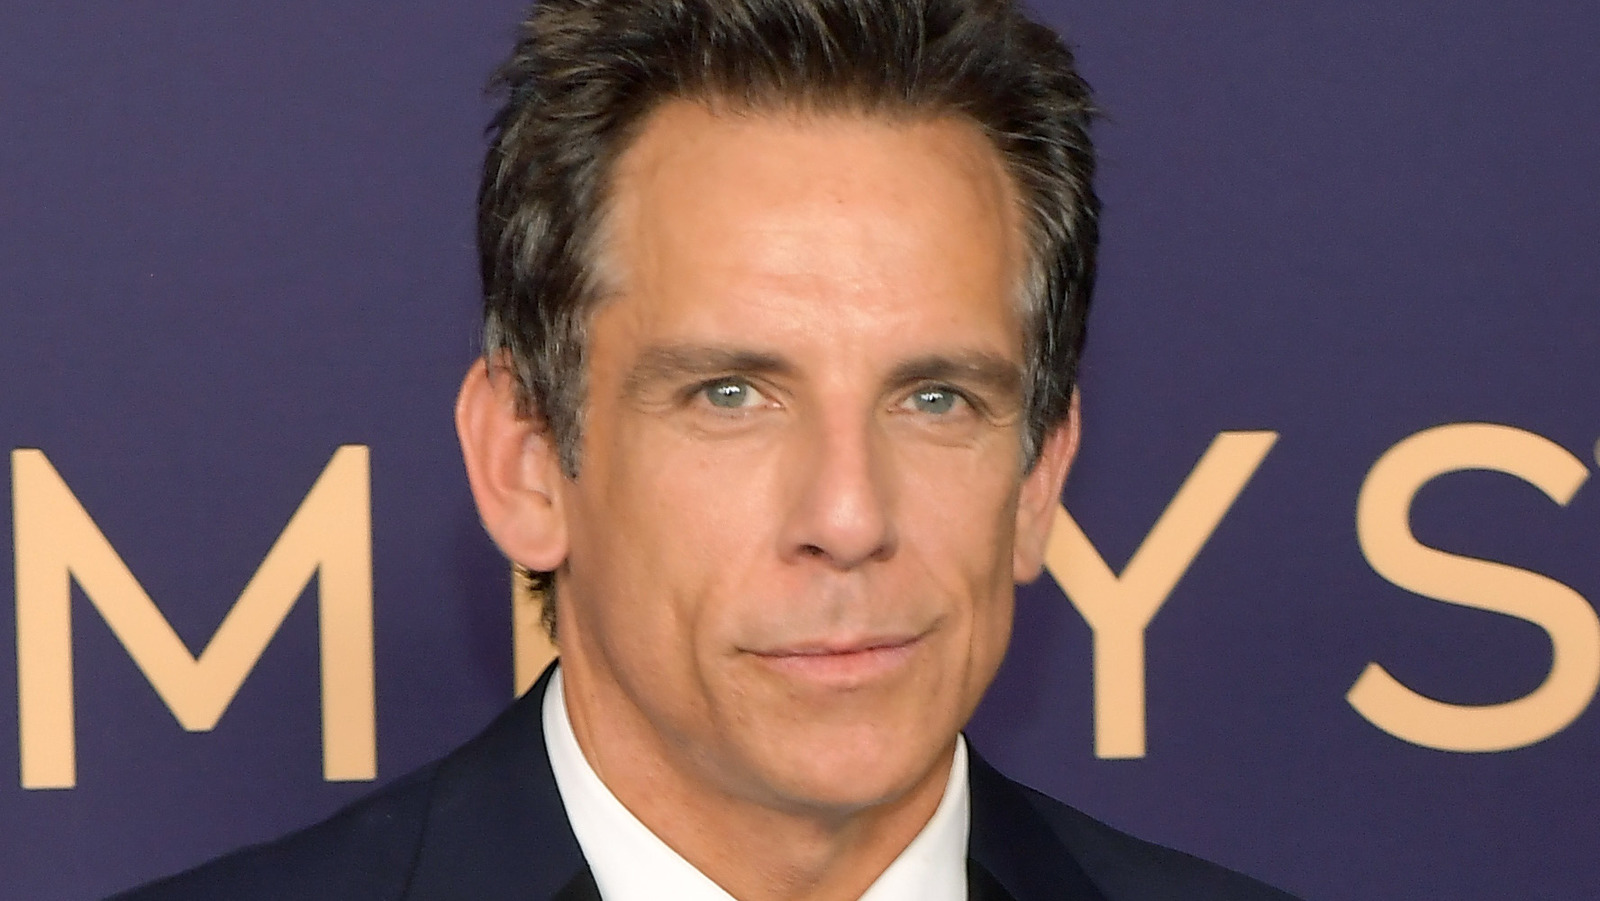 The Real Housewife You Didn't Know Ben Stiller Dated.